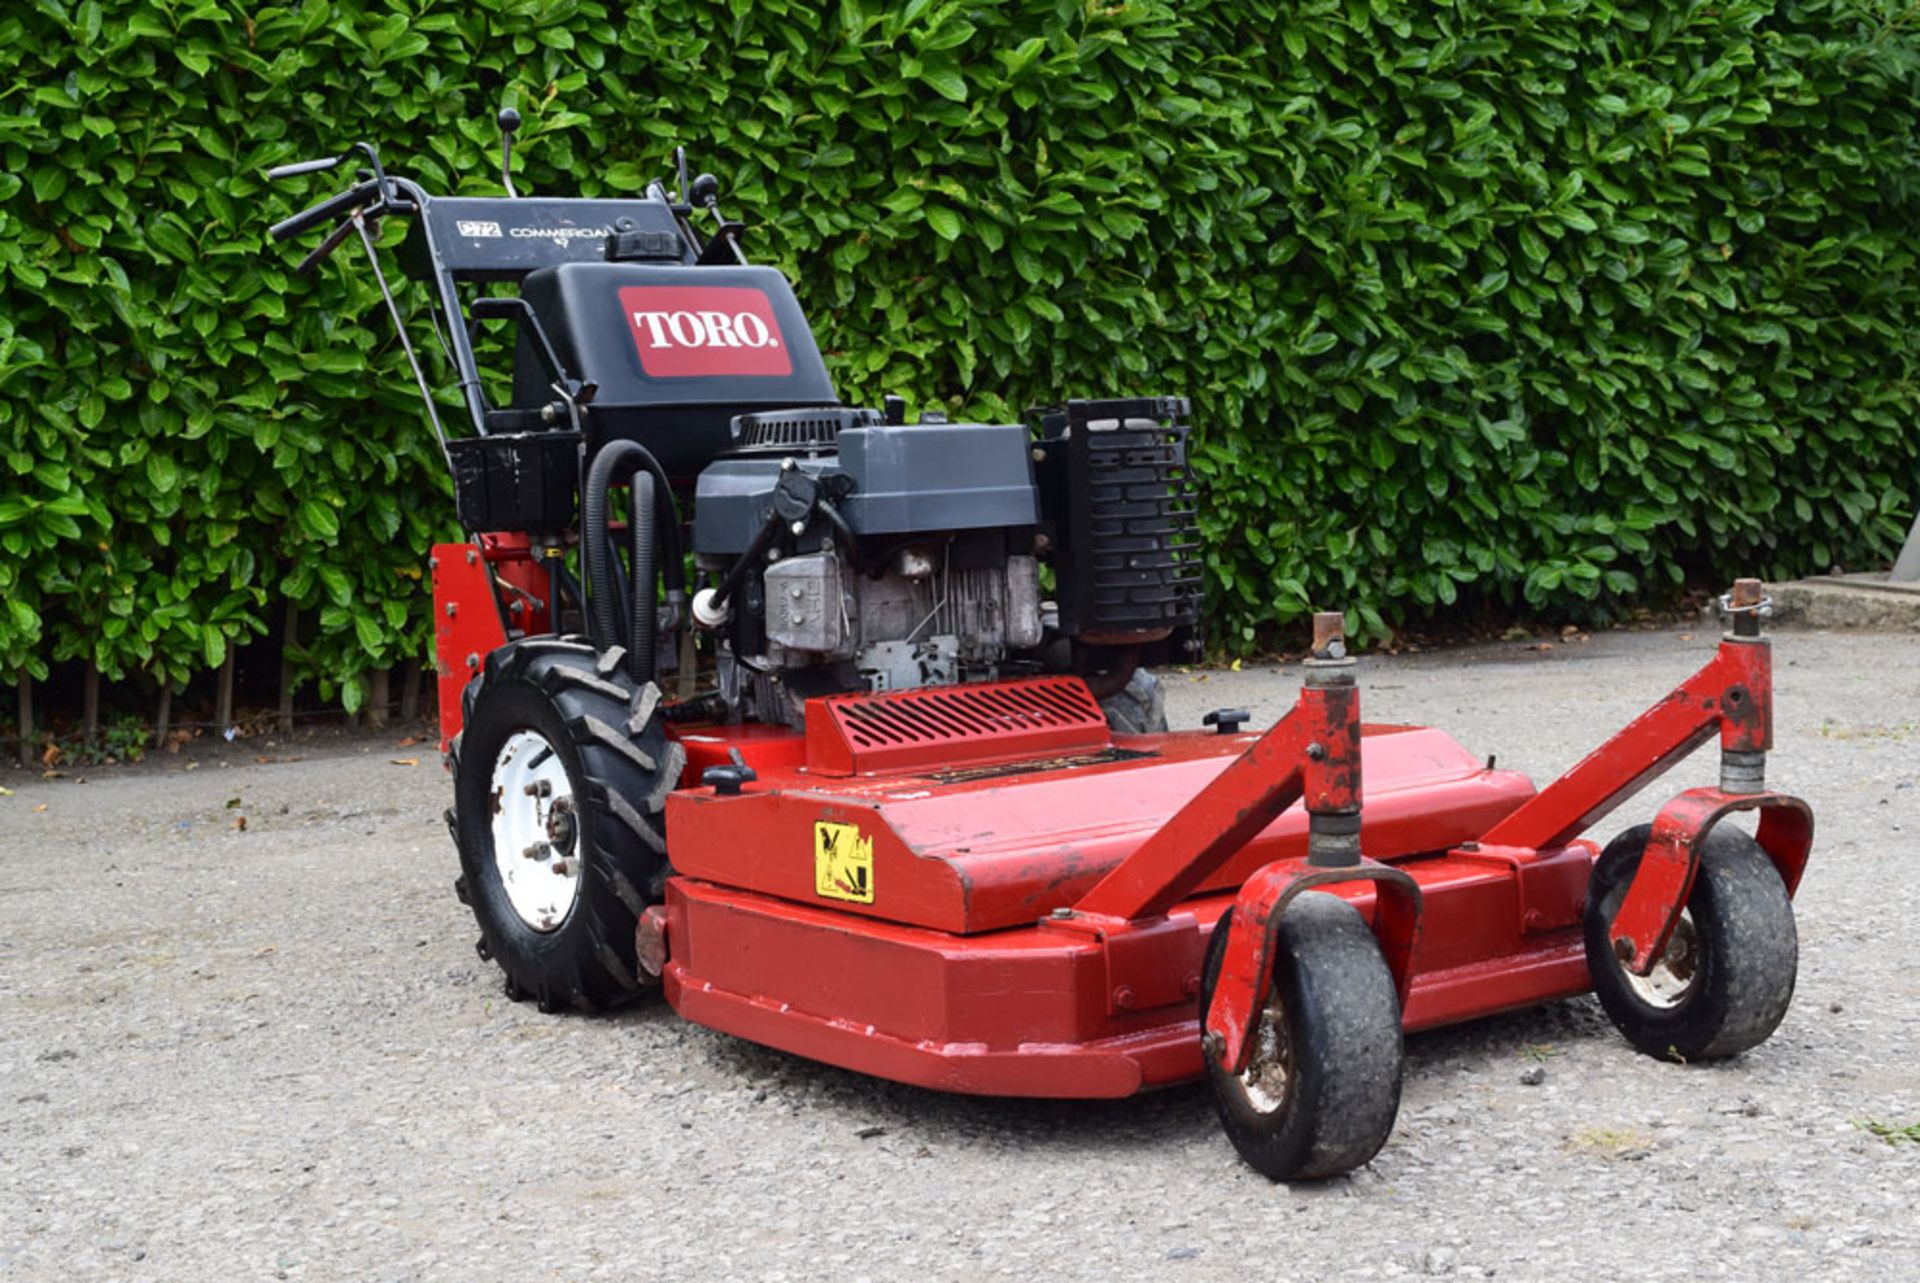 Toro Commercial Pedestrian 32" Commercial Walk Behind Zero Turn Rotary Mower - Image 5 of 6